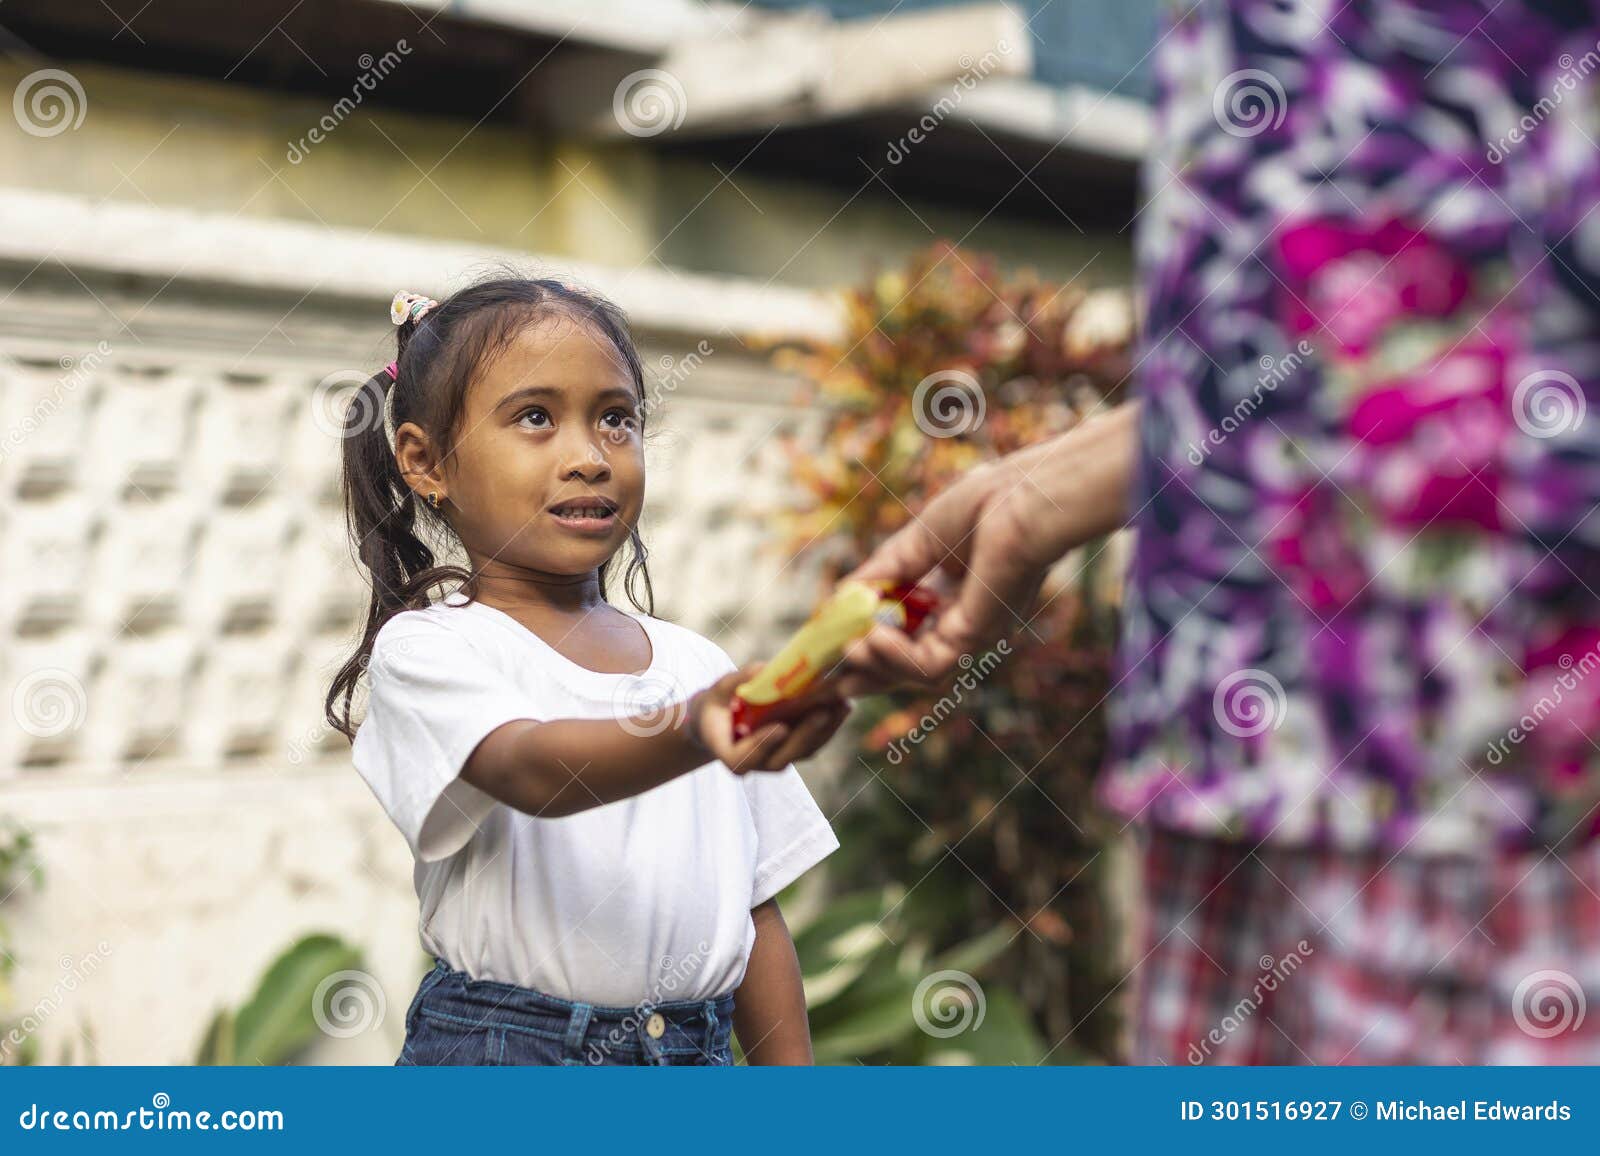 a grateful young girl saying thank you after given a pack of biscuits by her grandmother. outdoor scene